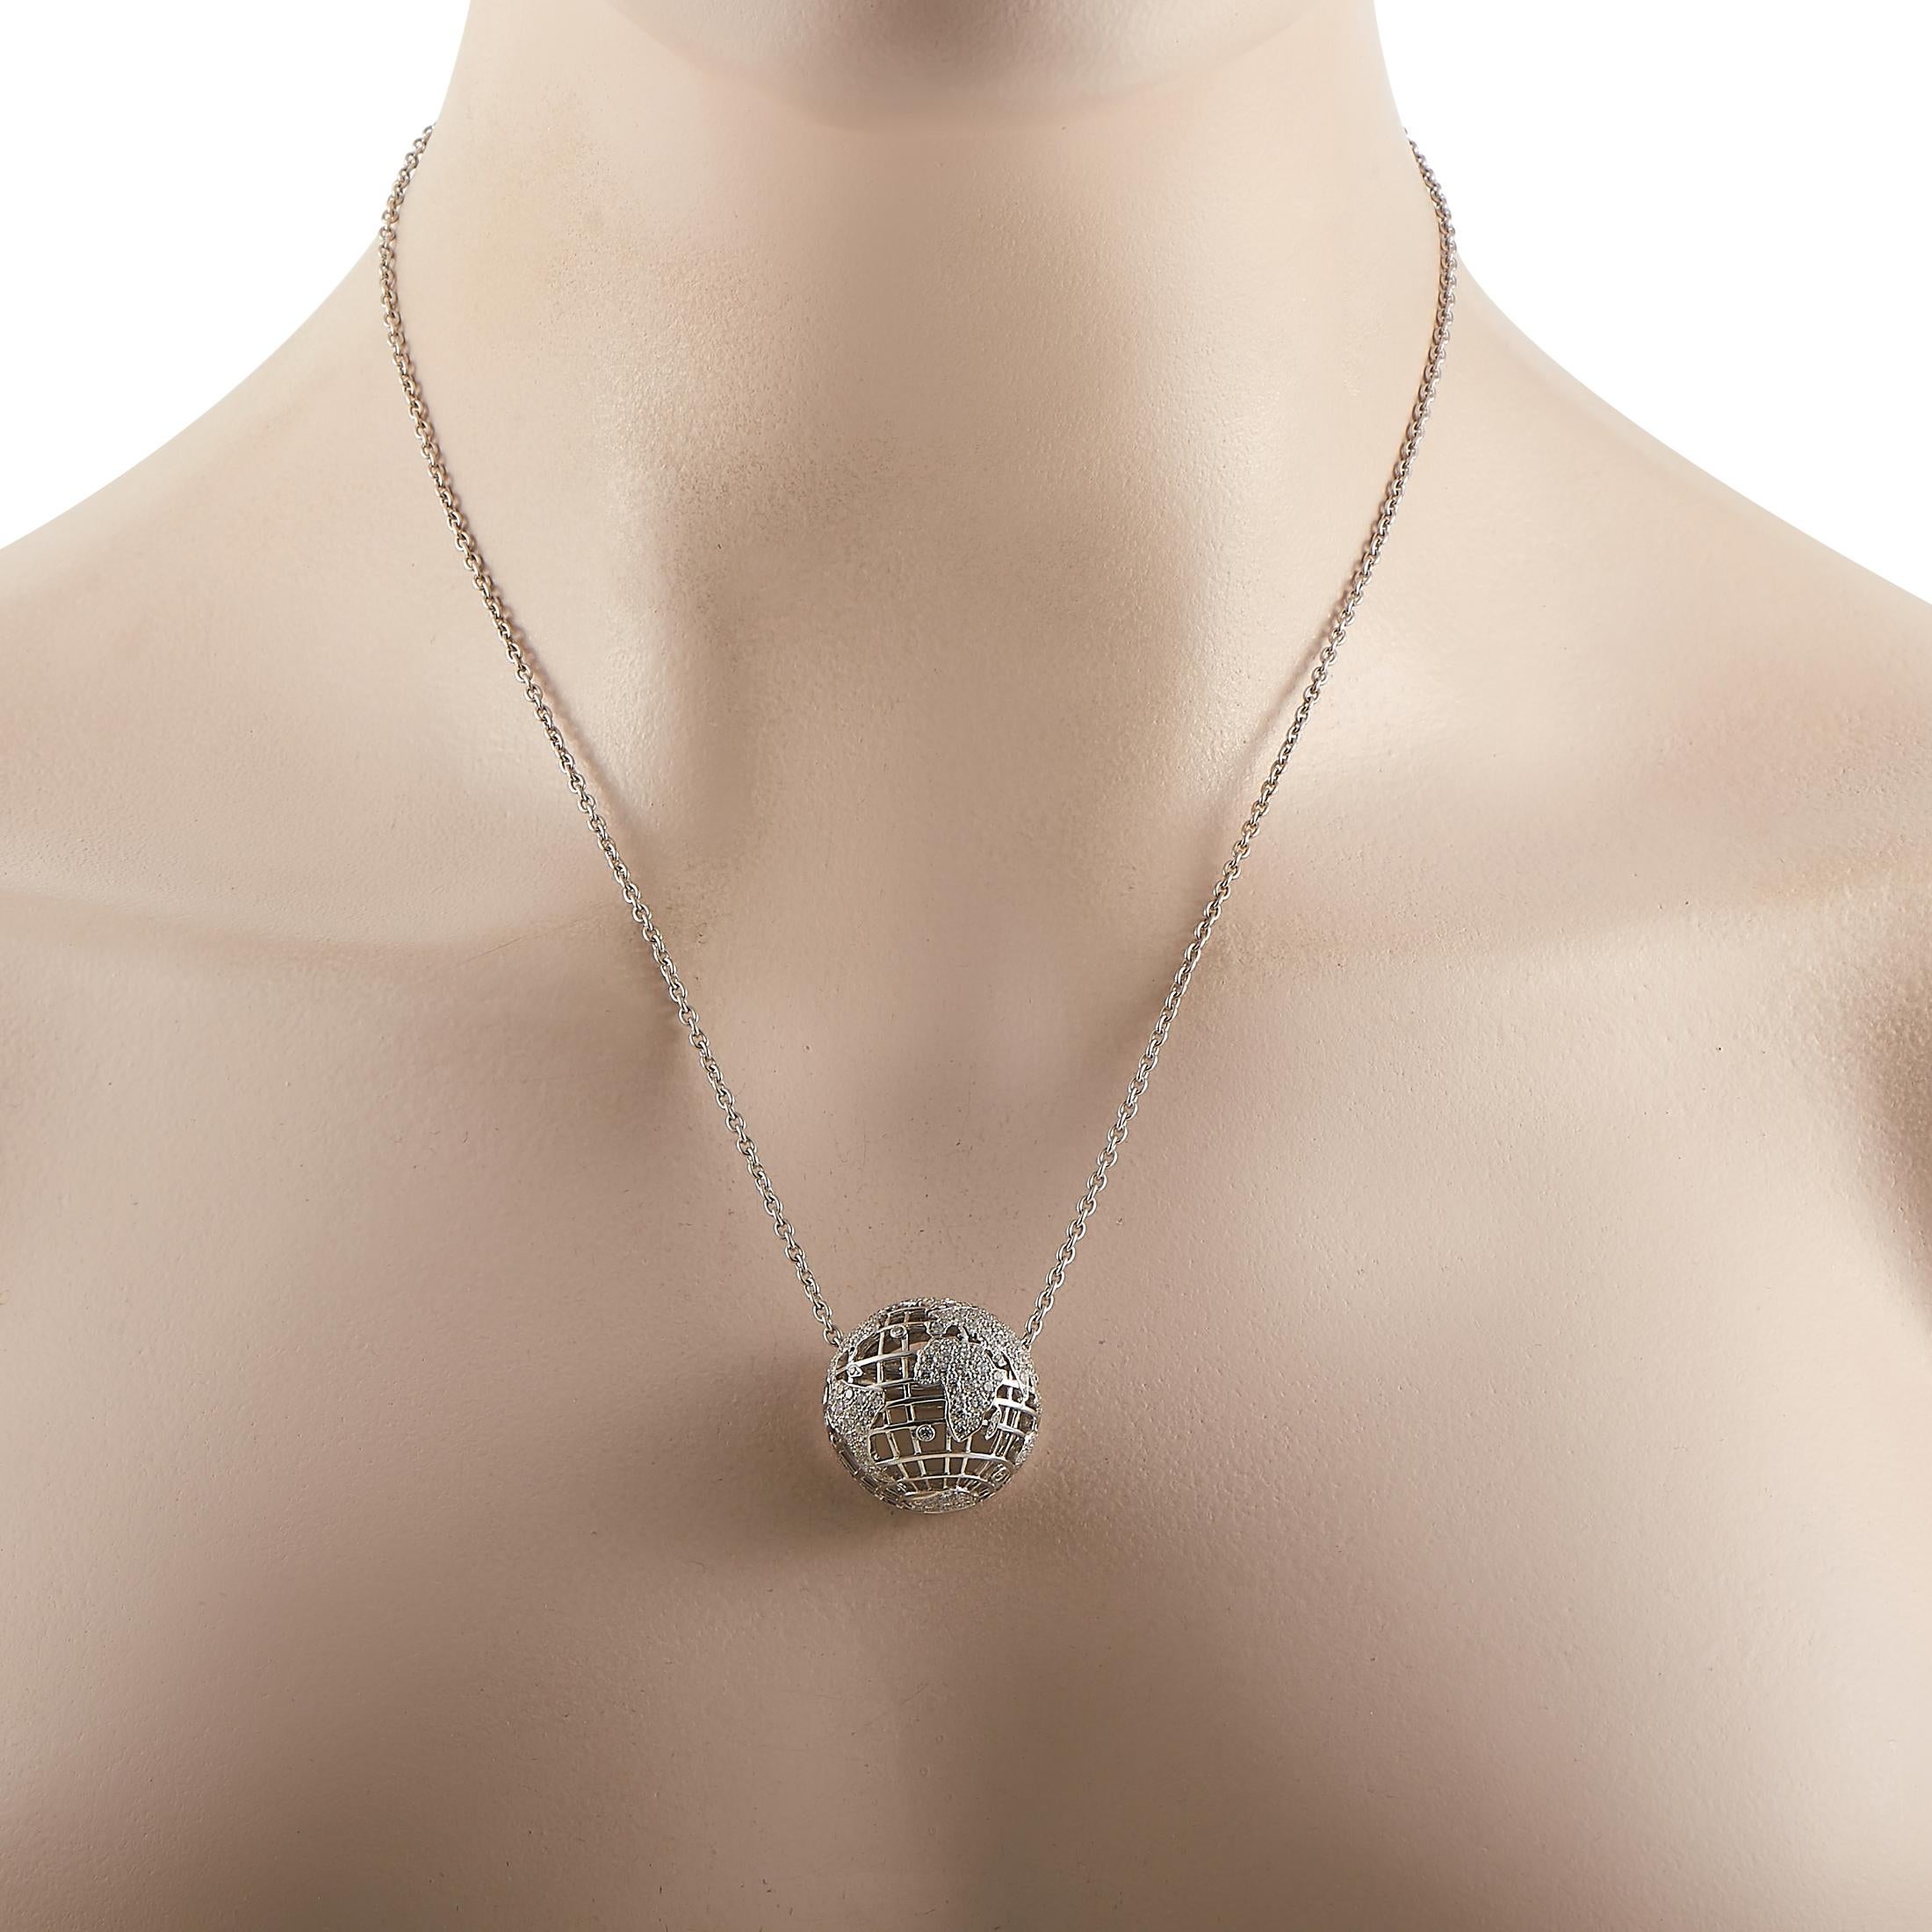 This whimsical necklace from Chanel will capture your imagination thanks to the dainty globe measuring .75” round suspended from a 17” chain. The charming 18K White Gold pendant also includes glittering inset round-cut diamonds with a total weight